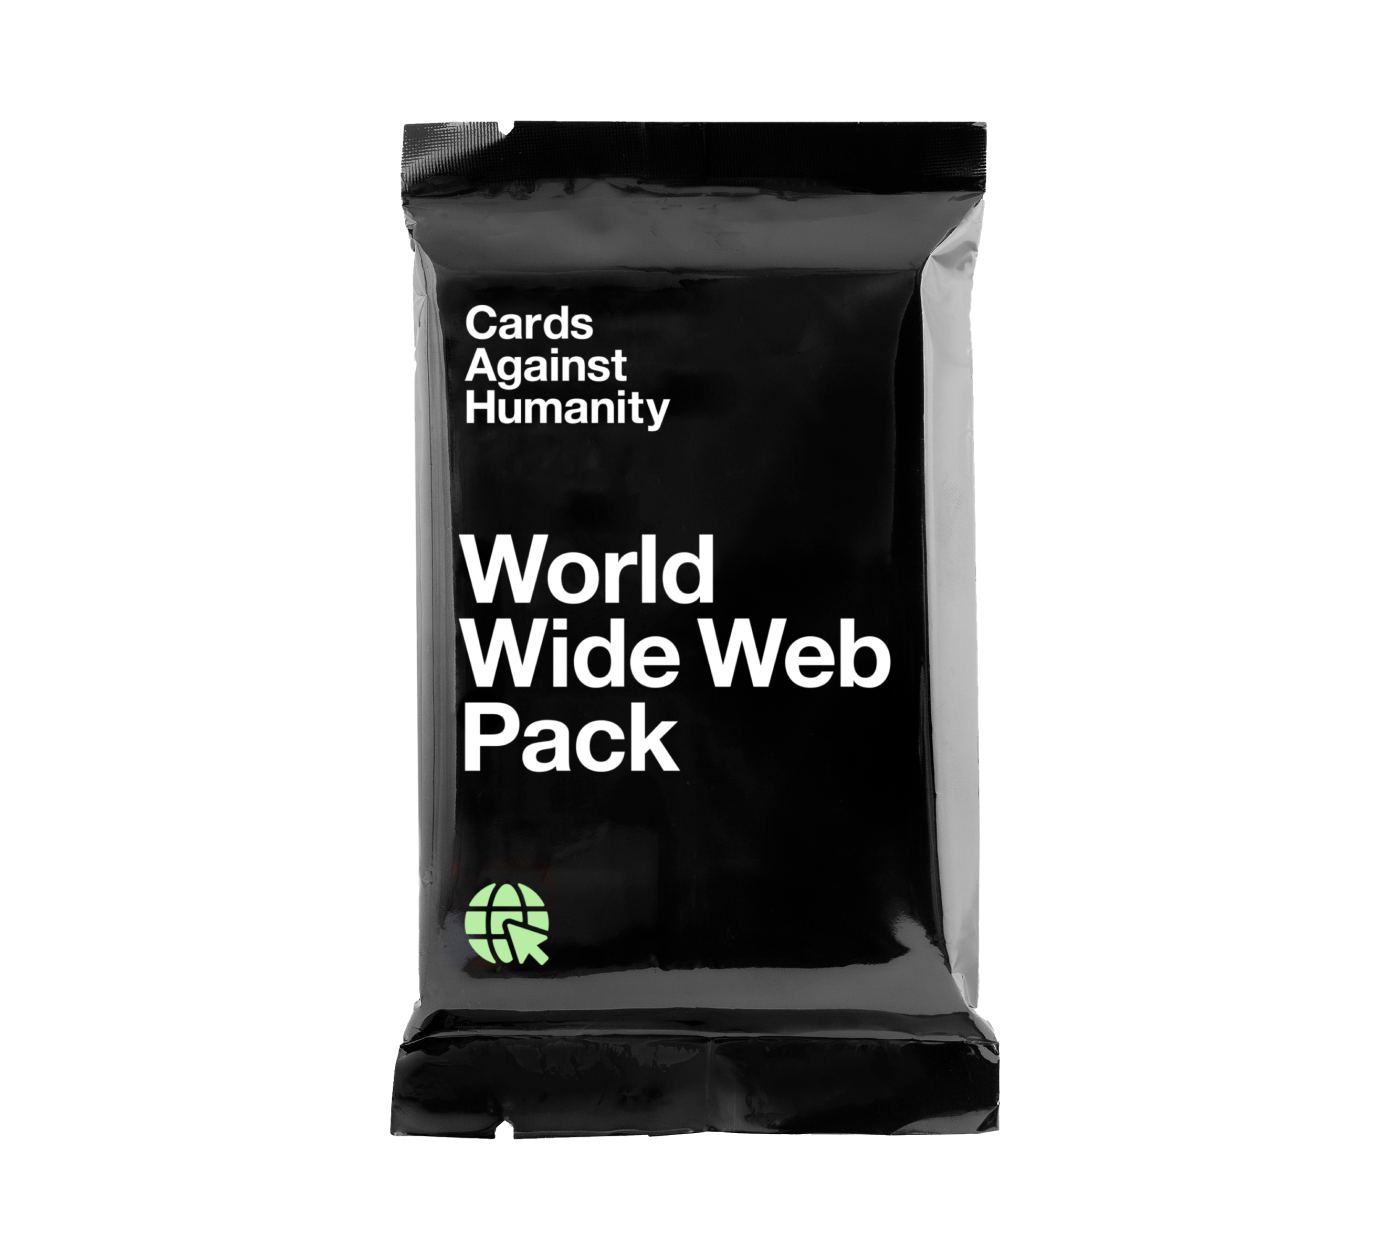 SEALED Cards Against Humanity Expansion WORLD WIDE WEB pack CAH WWW New deck 